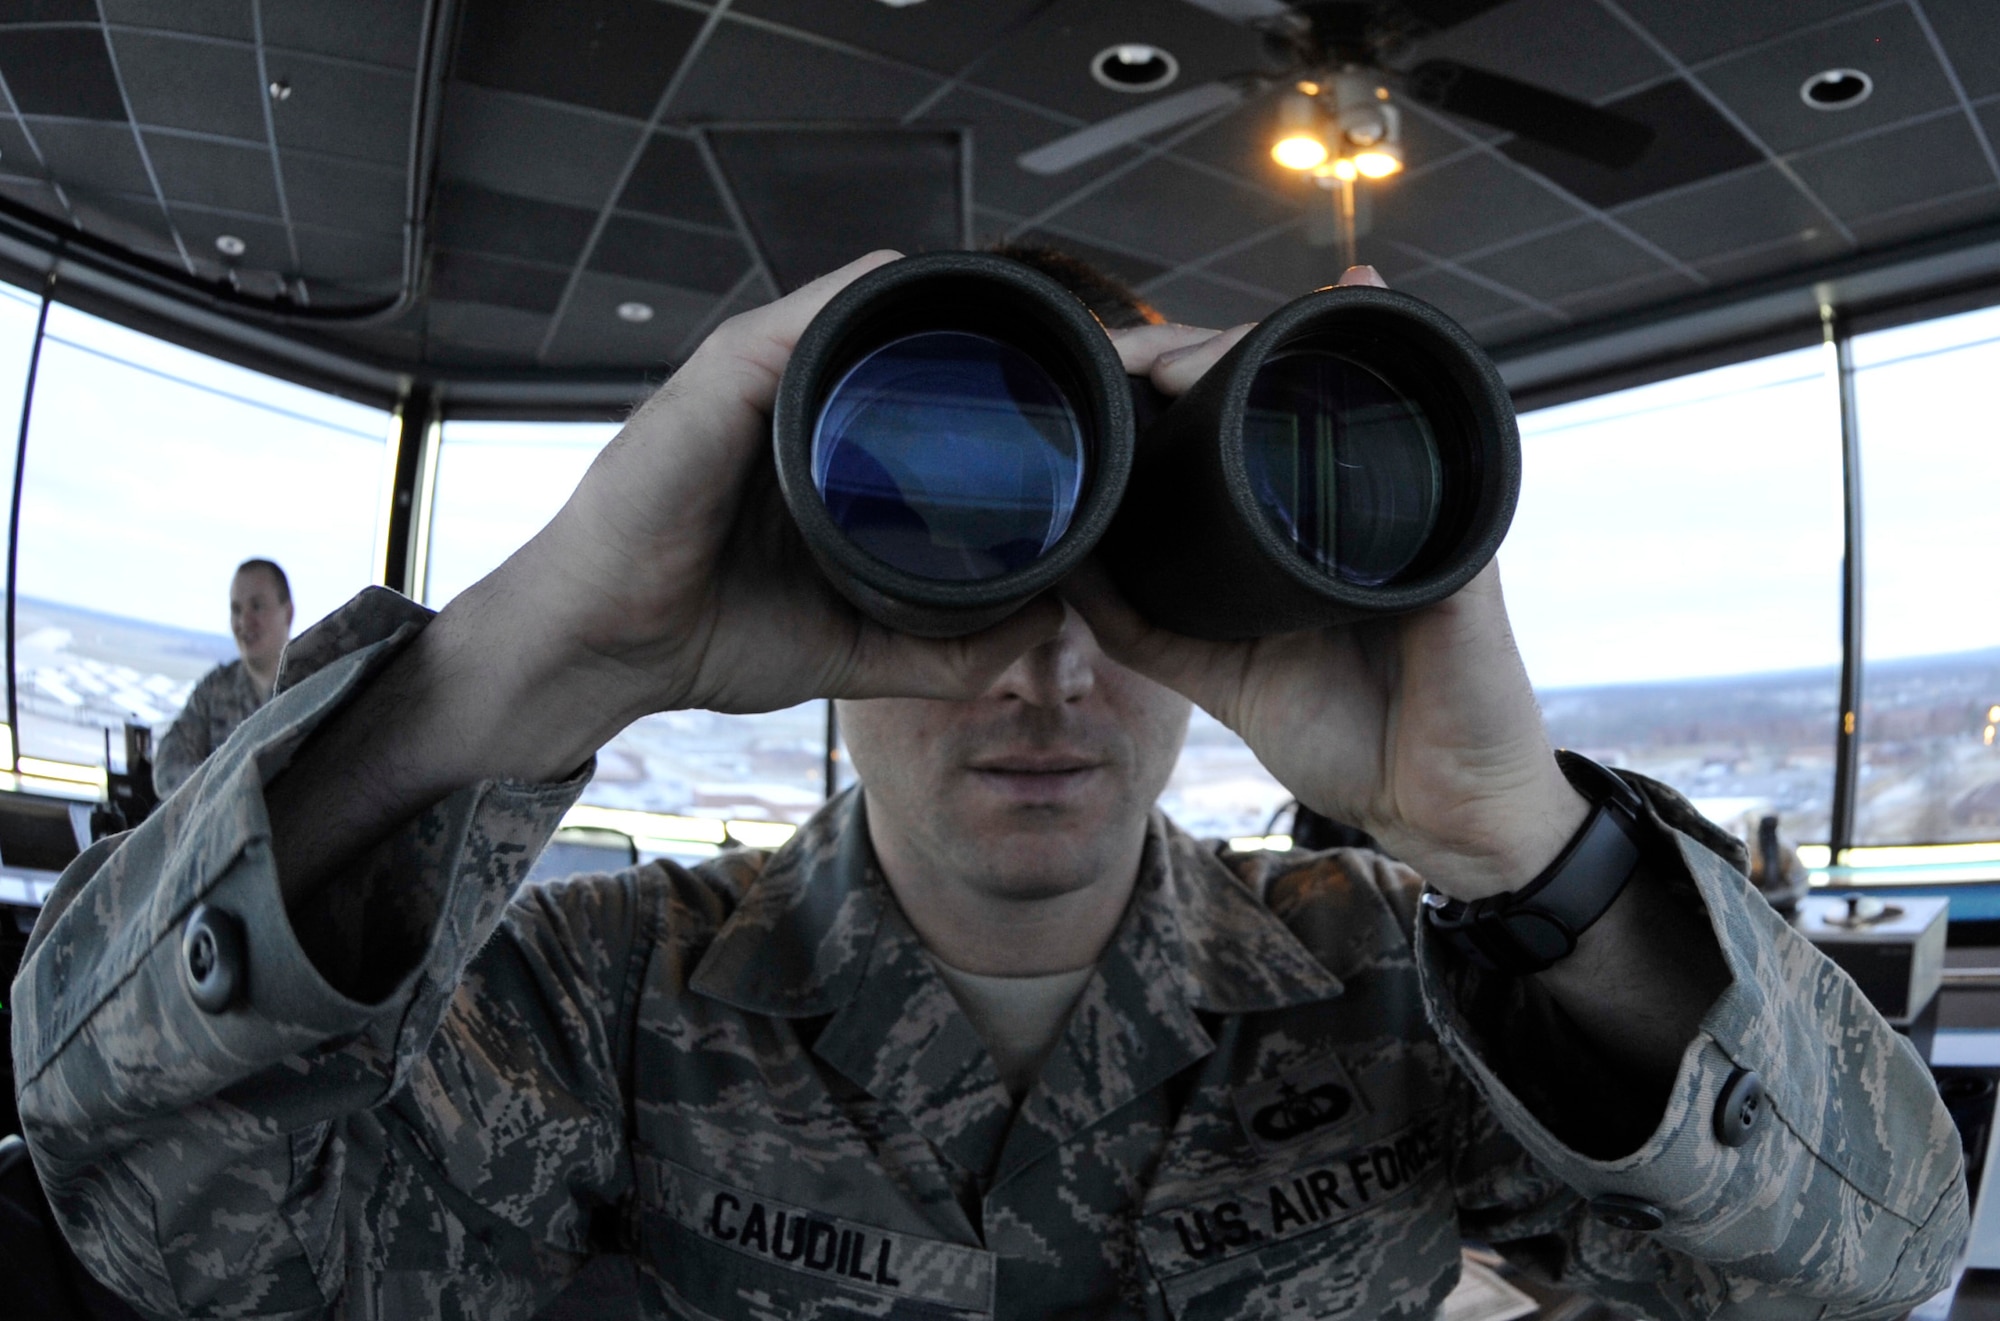 Staff Sgt. Blaine Caudill, 509th Operations Support Squadron air traffic control watch supervisor, scans the skies around Whiteman Air Force Base for birds, March 11, 2013. Scanning for birds is an important procedure that helps prevent accidental strikes by aircraft. (U.S. Air Force photo by Airman 1st Class Keenan Berry/Released)